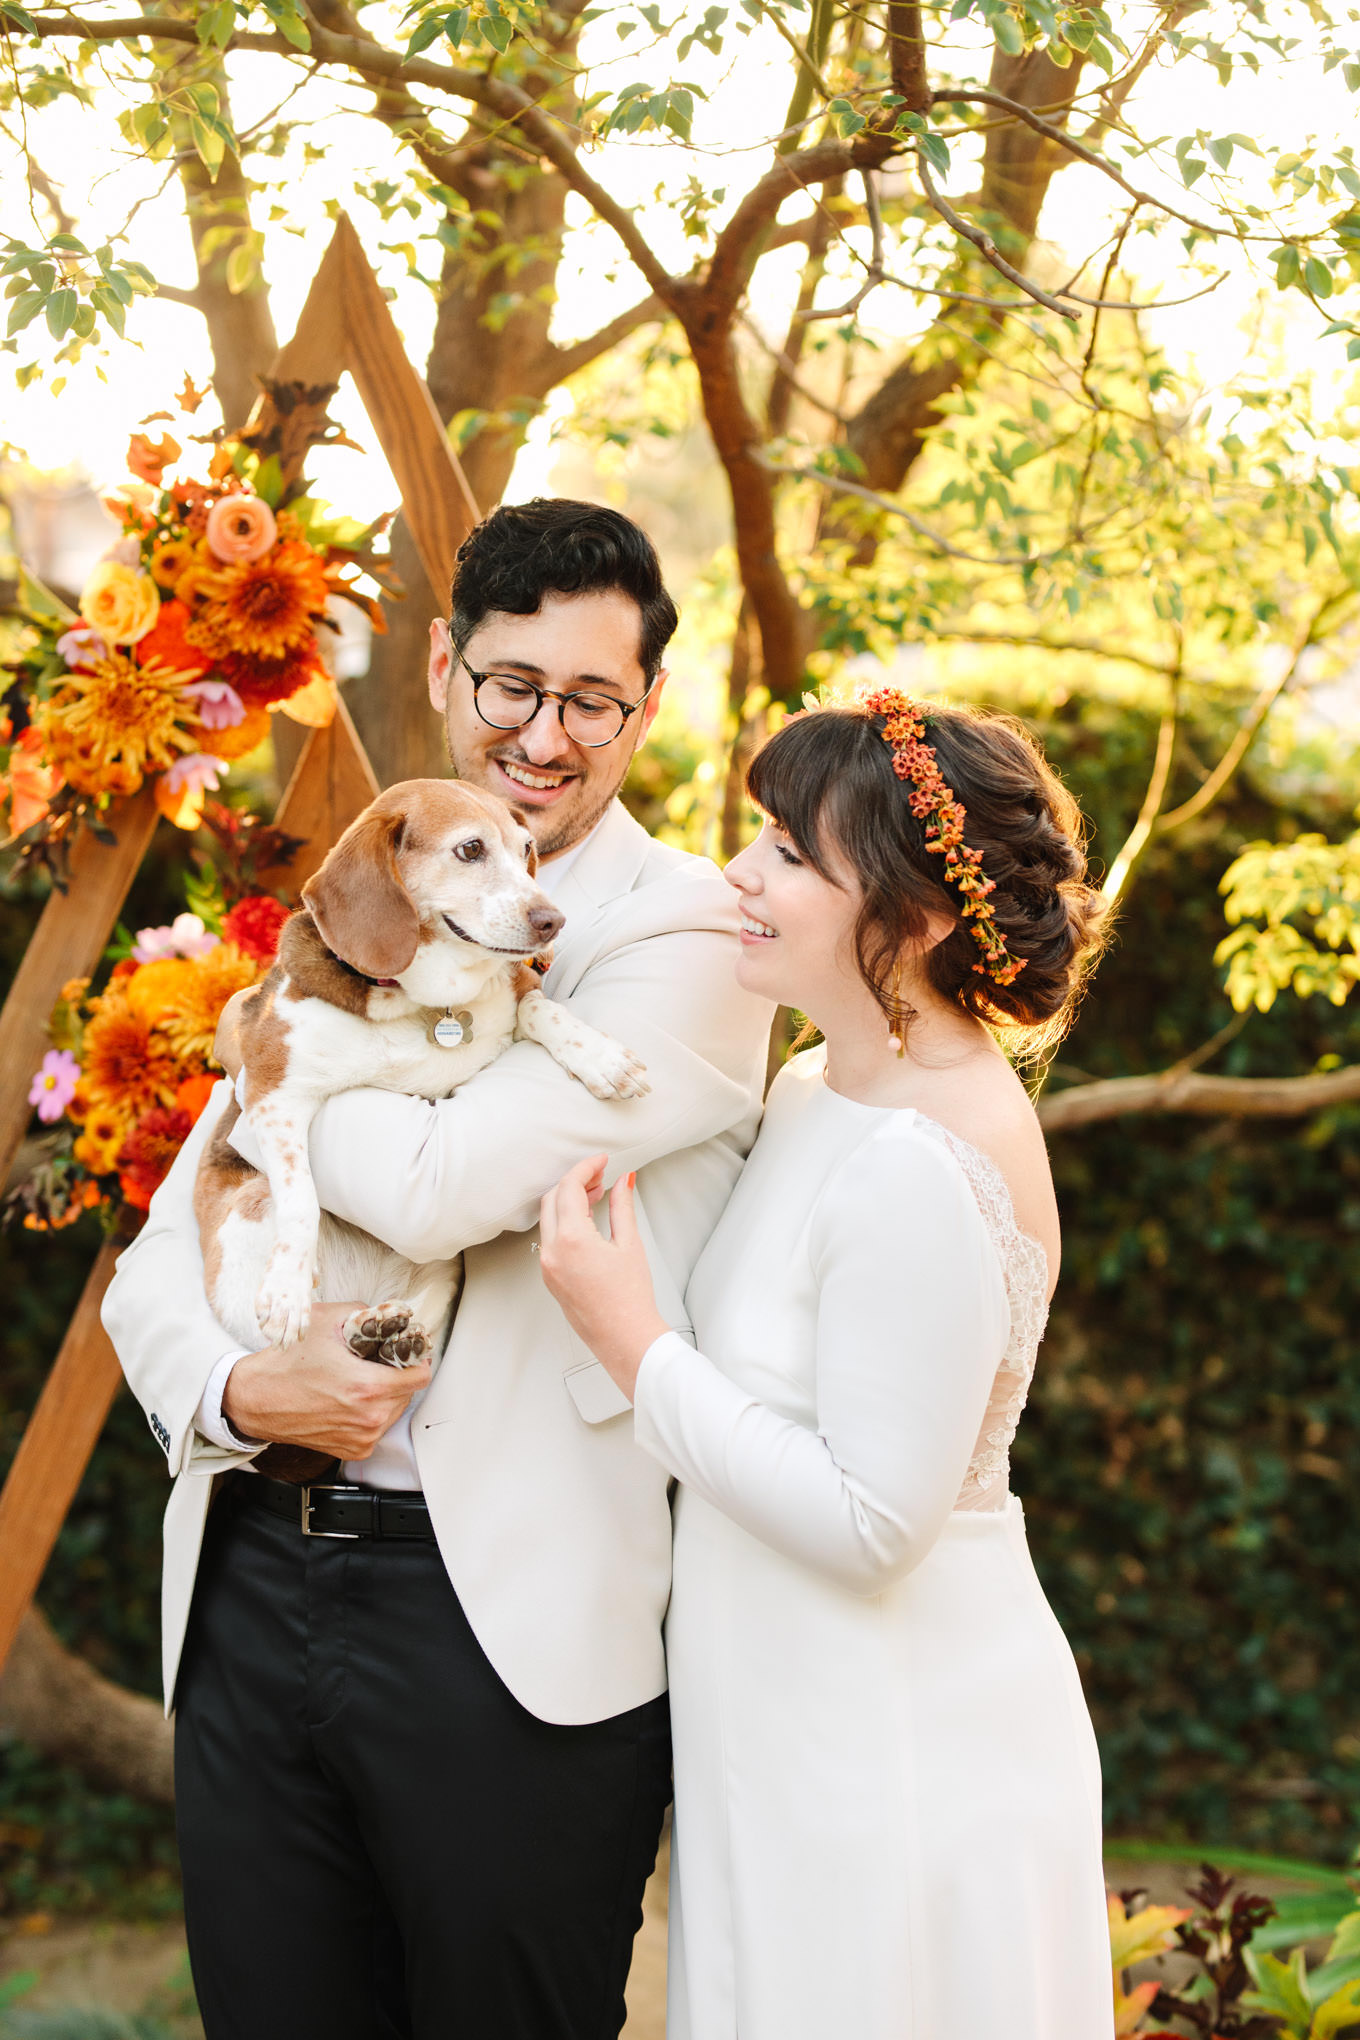 Bride and groom with their dog | Vibrant backyard micro wedding featured on Green Wedding Shoes | Colorful LA wedding photography | #losangeleswedding #backyardwedding #microwedding #laweddingphotographer Source: Mary Costa Photography | Los Angeles